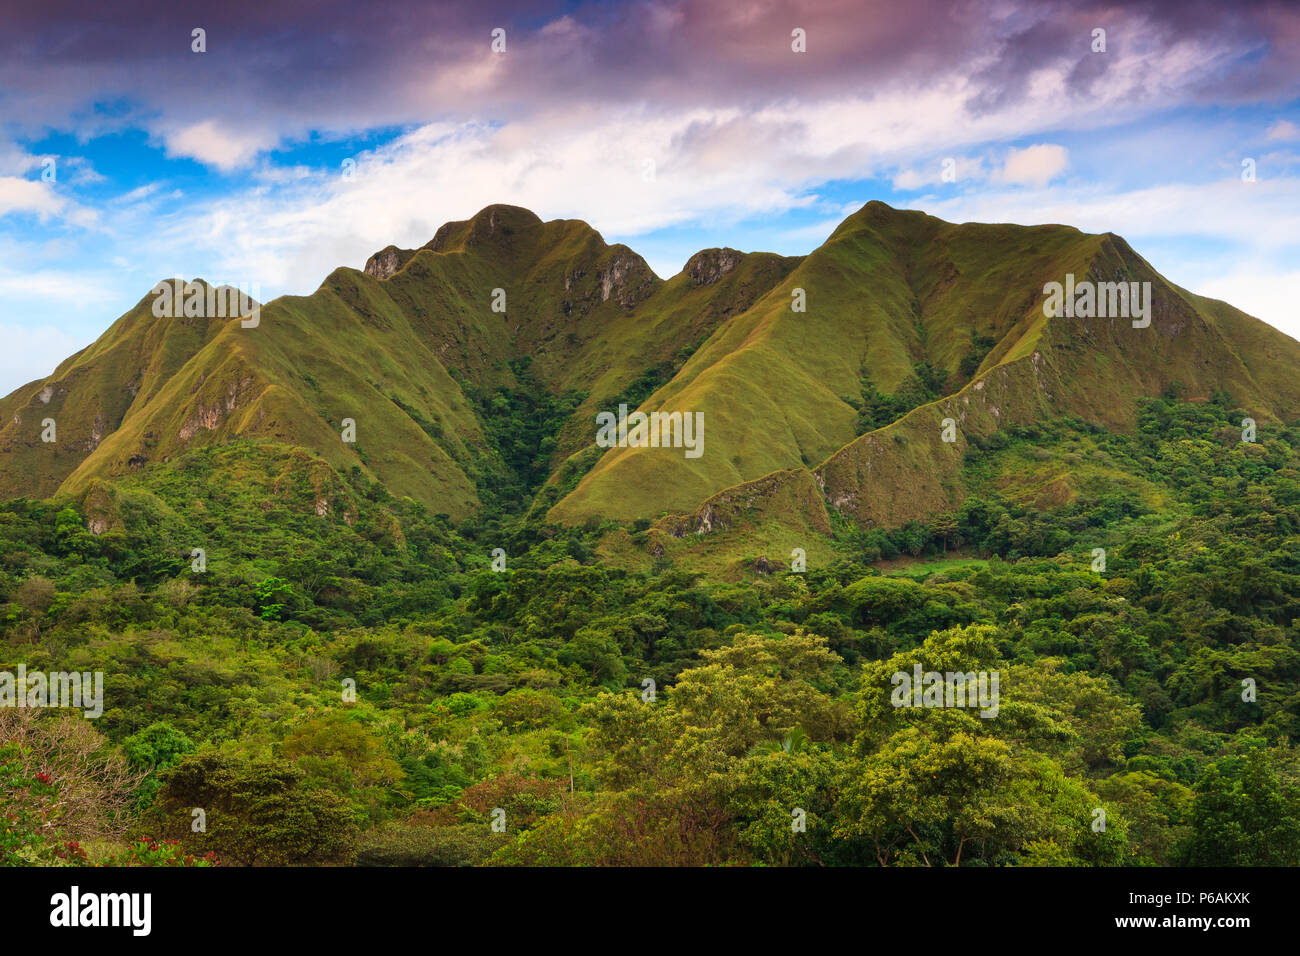 Panama mountain landscape with early morning light at the beautiful mountains Cerros los Picachos de Ola, Cocle province, Republic of Panama. Stock Photo